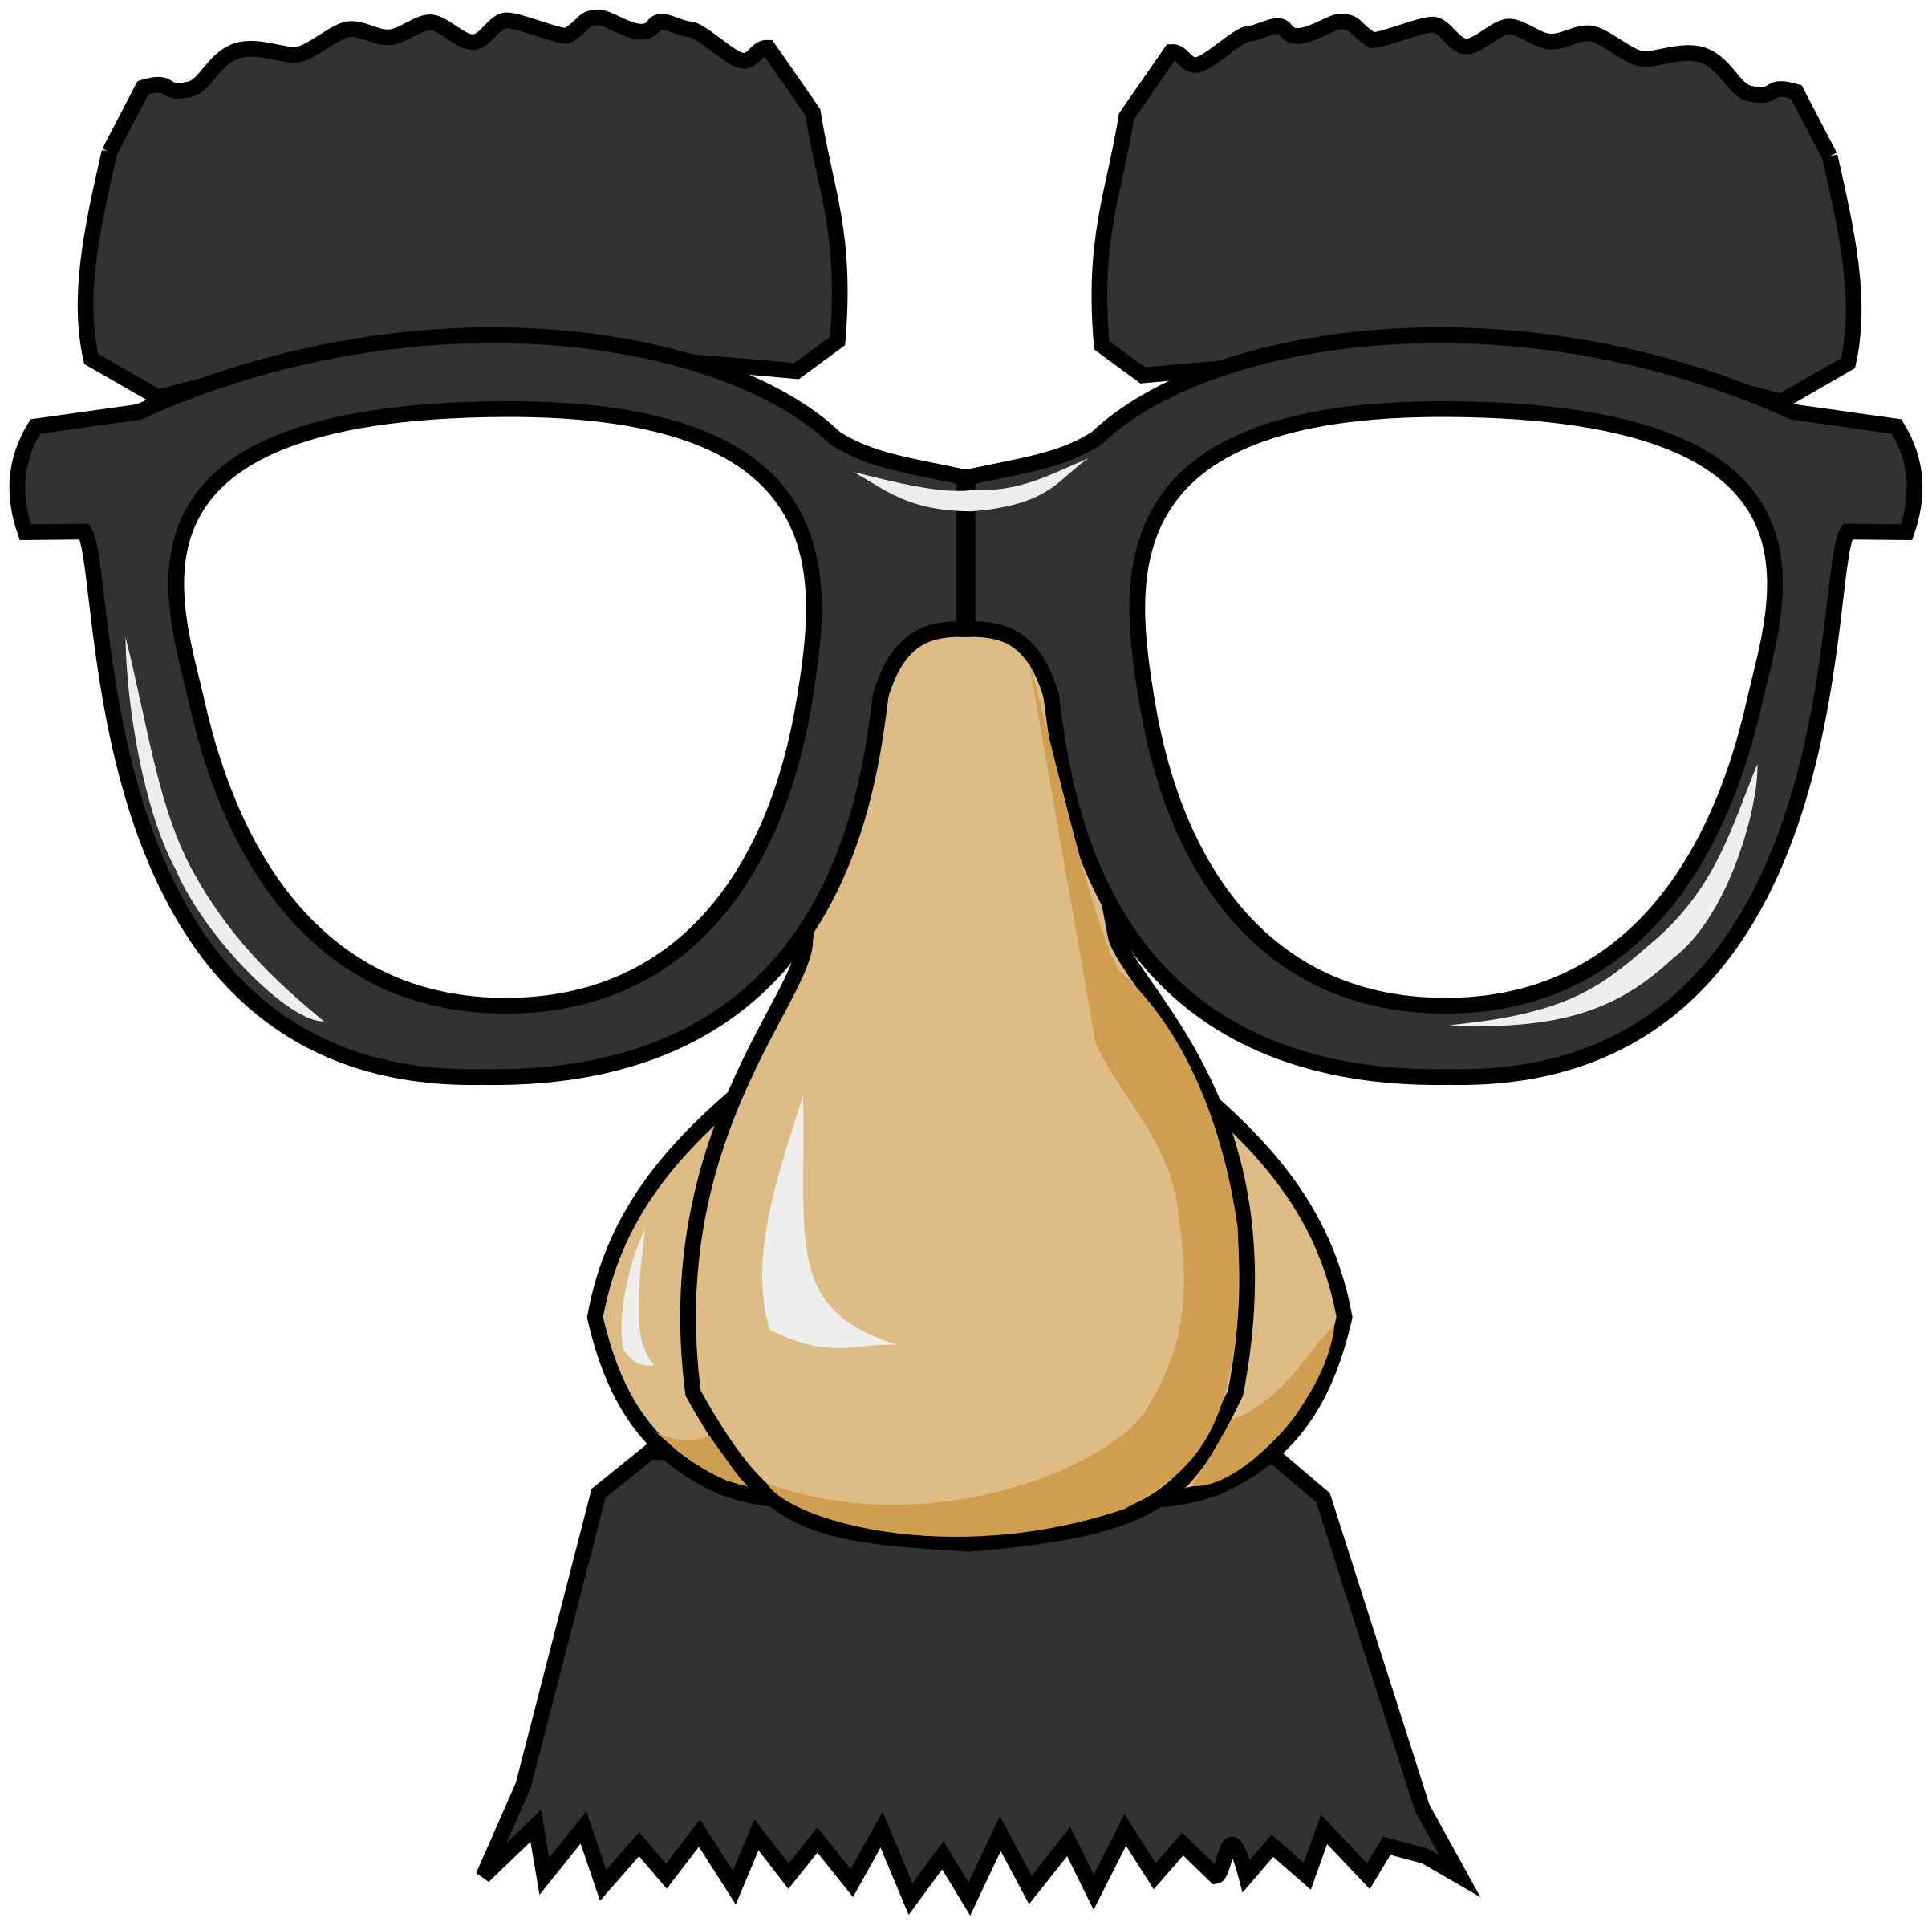 Funny glasses big image. Wolf clipart nose